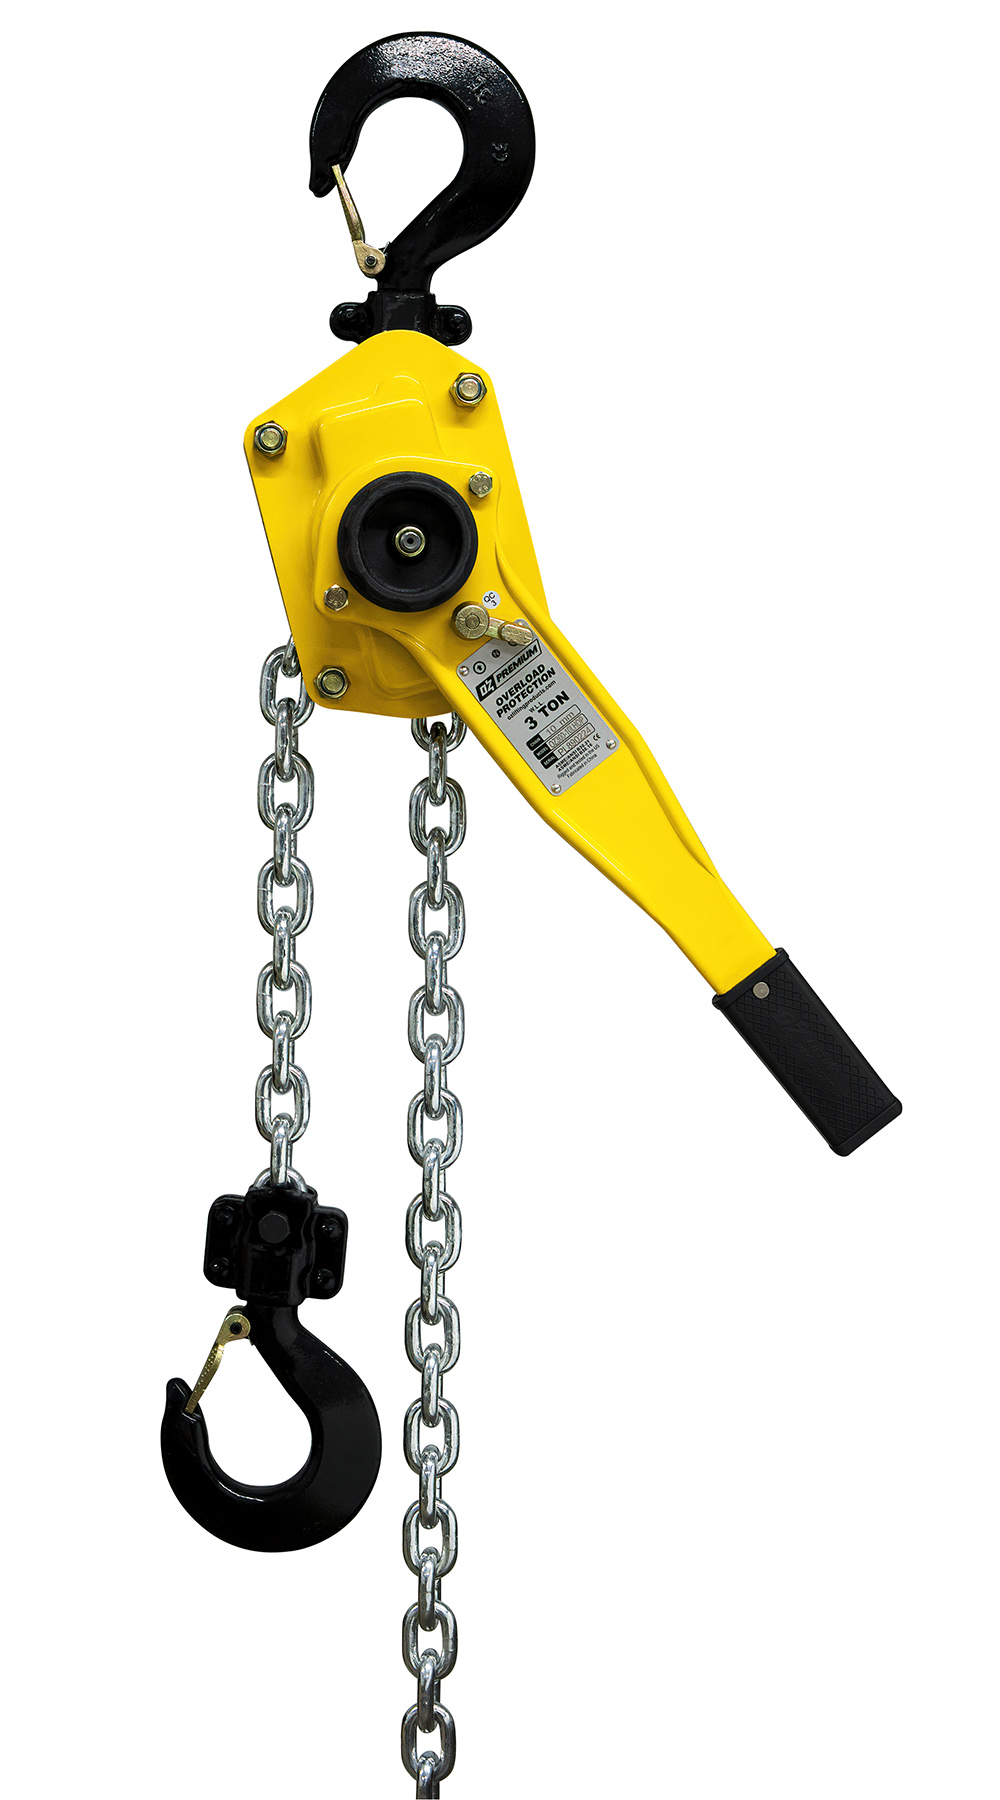 OZ Premium Lever Hoist w/Overload Protection - OZ Lifting Products